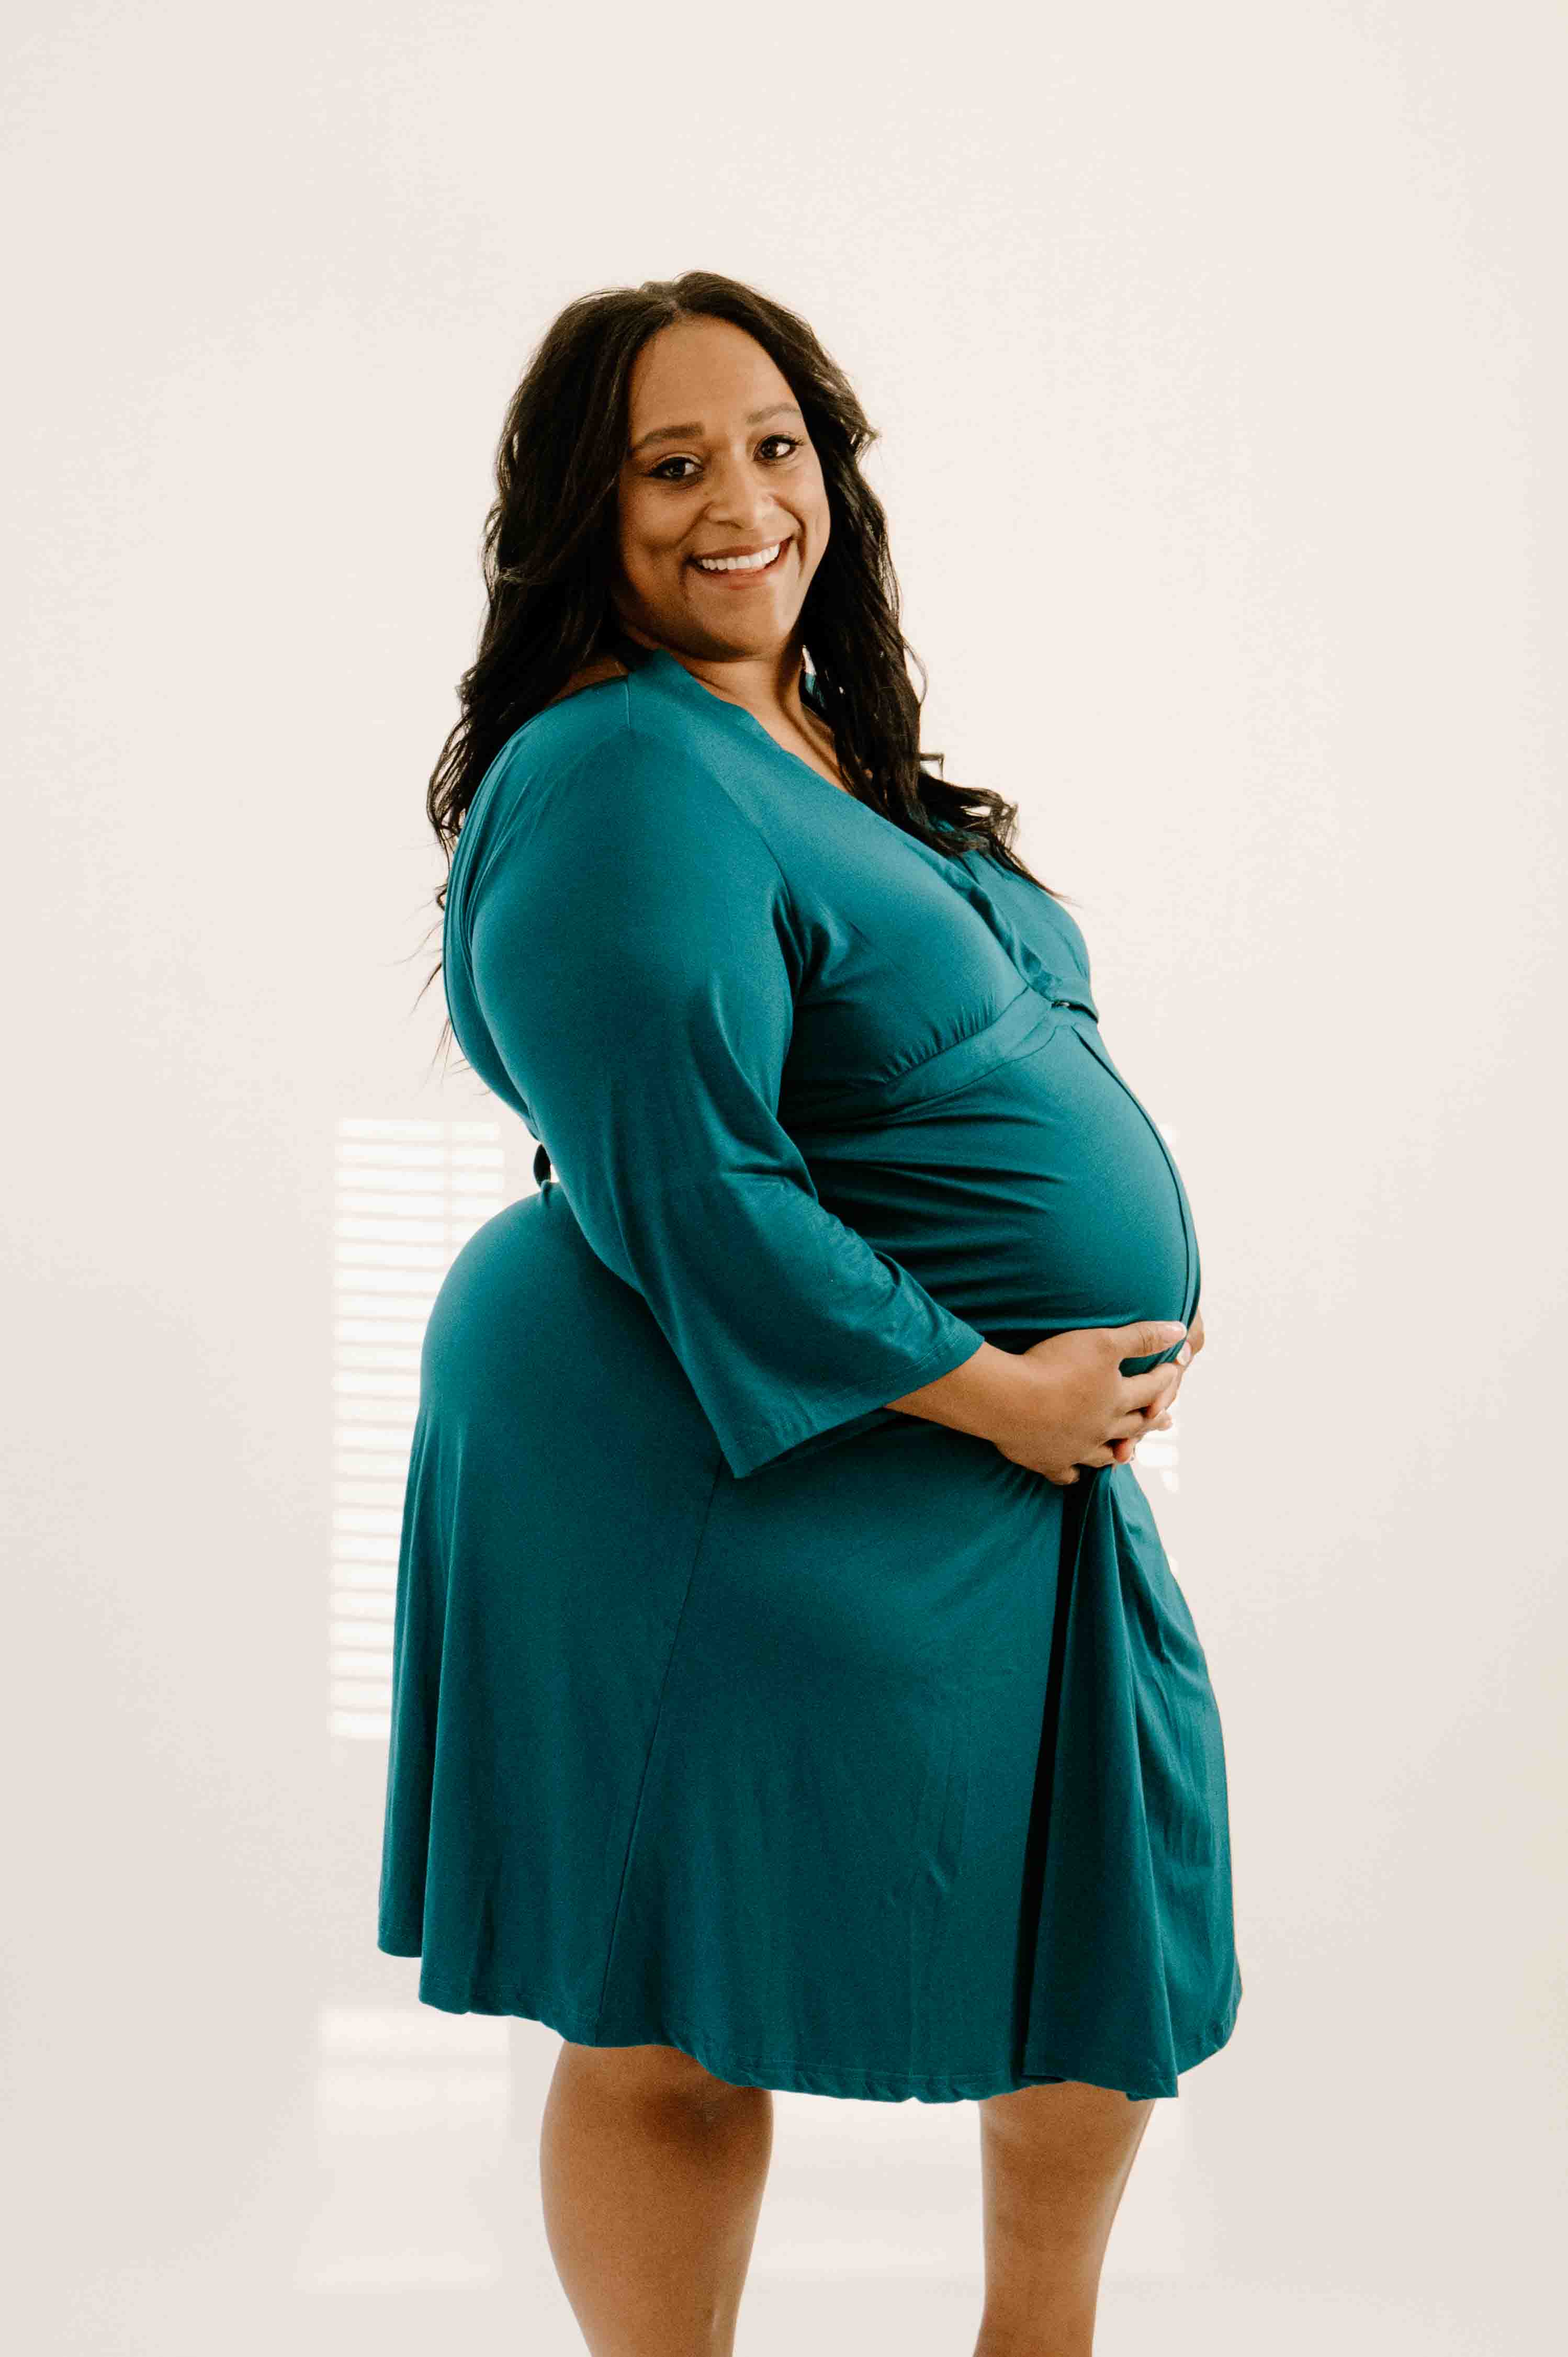 Queen Bee - Maternity Clothes, Maternity Wear & Nursing Clothes